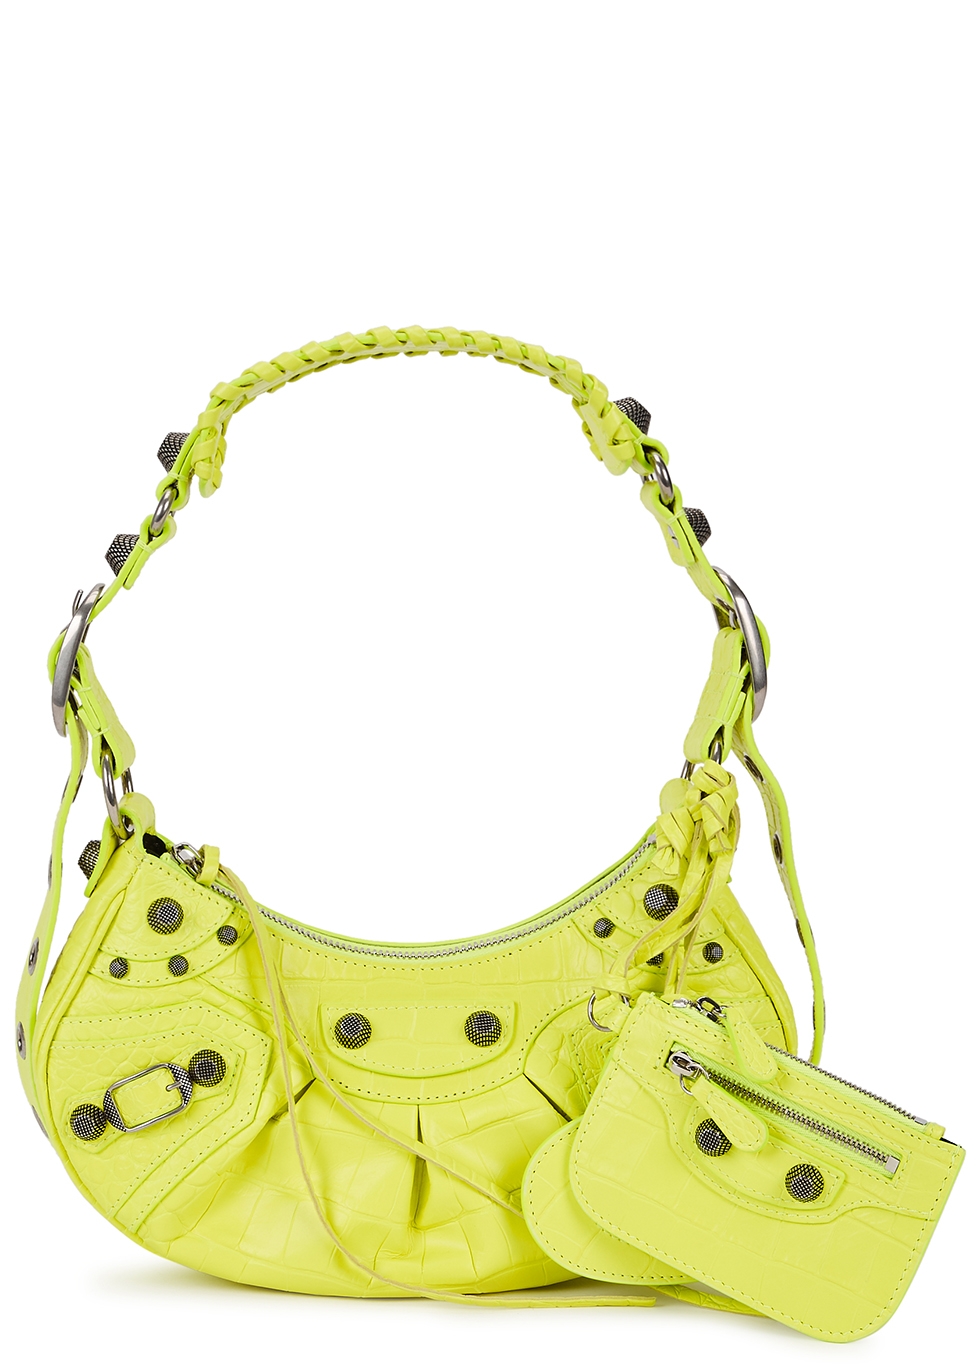 Le Cagole XS neon yellow leather shoulder bag